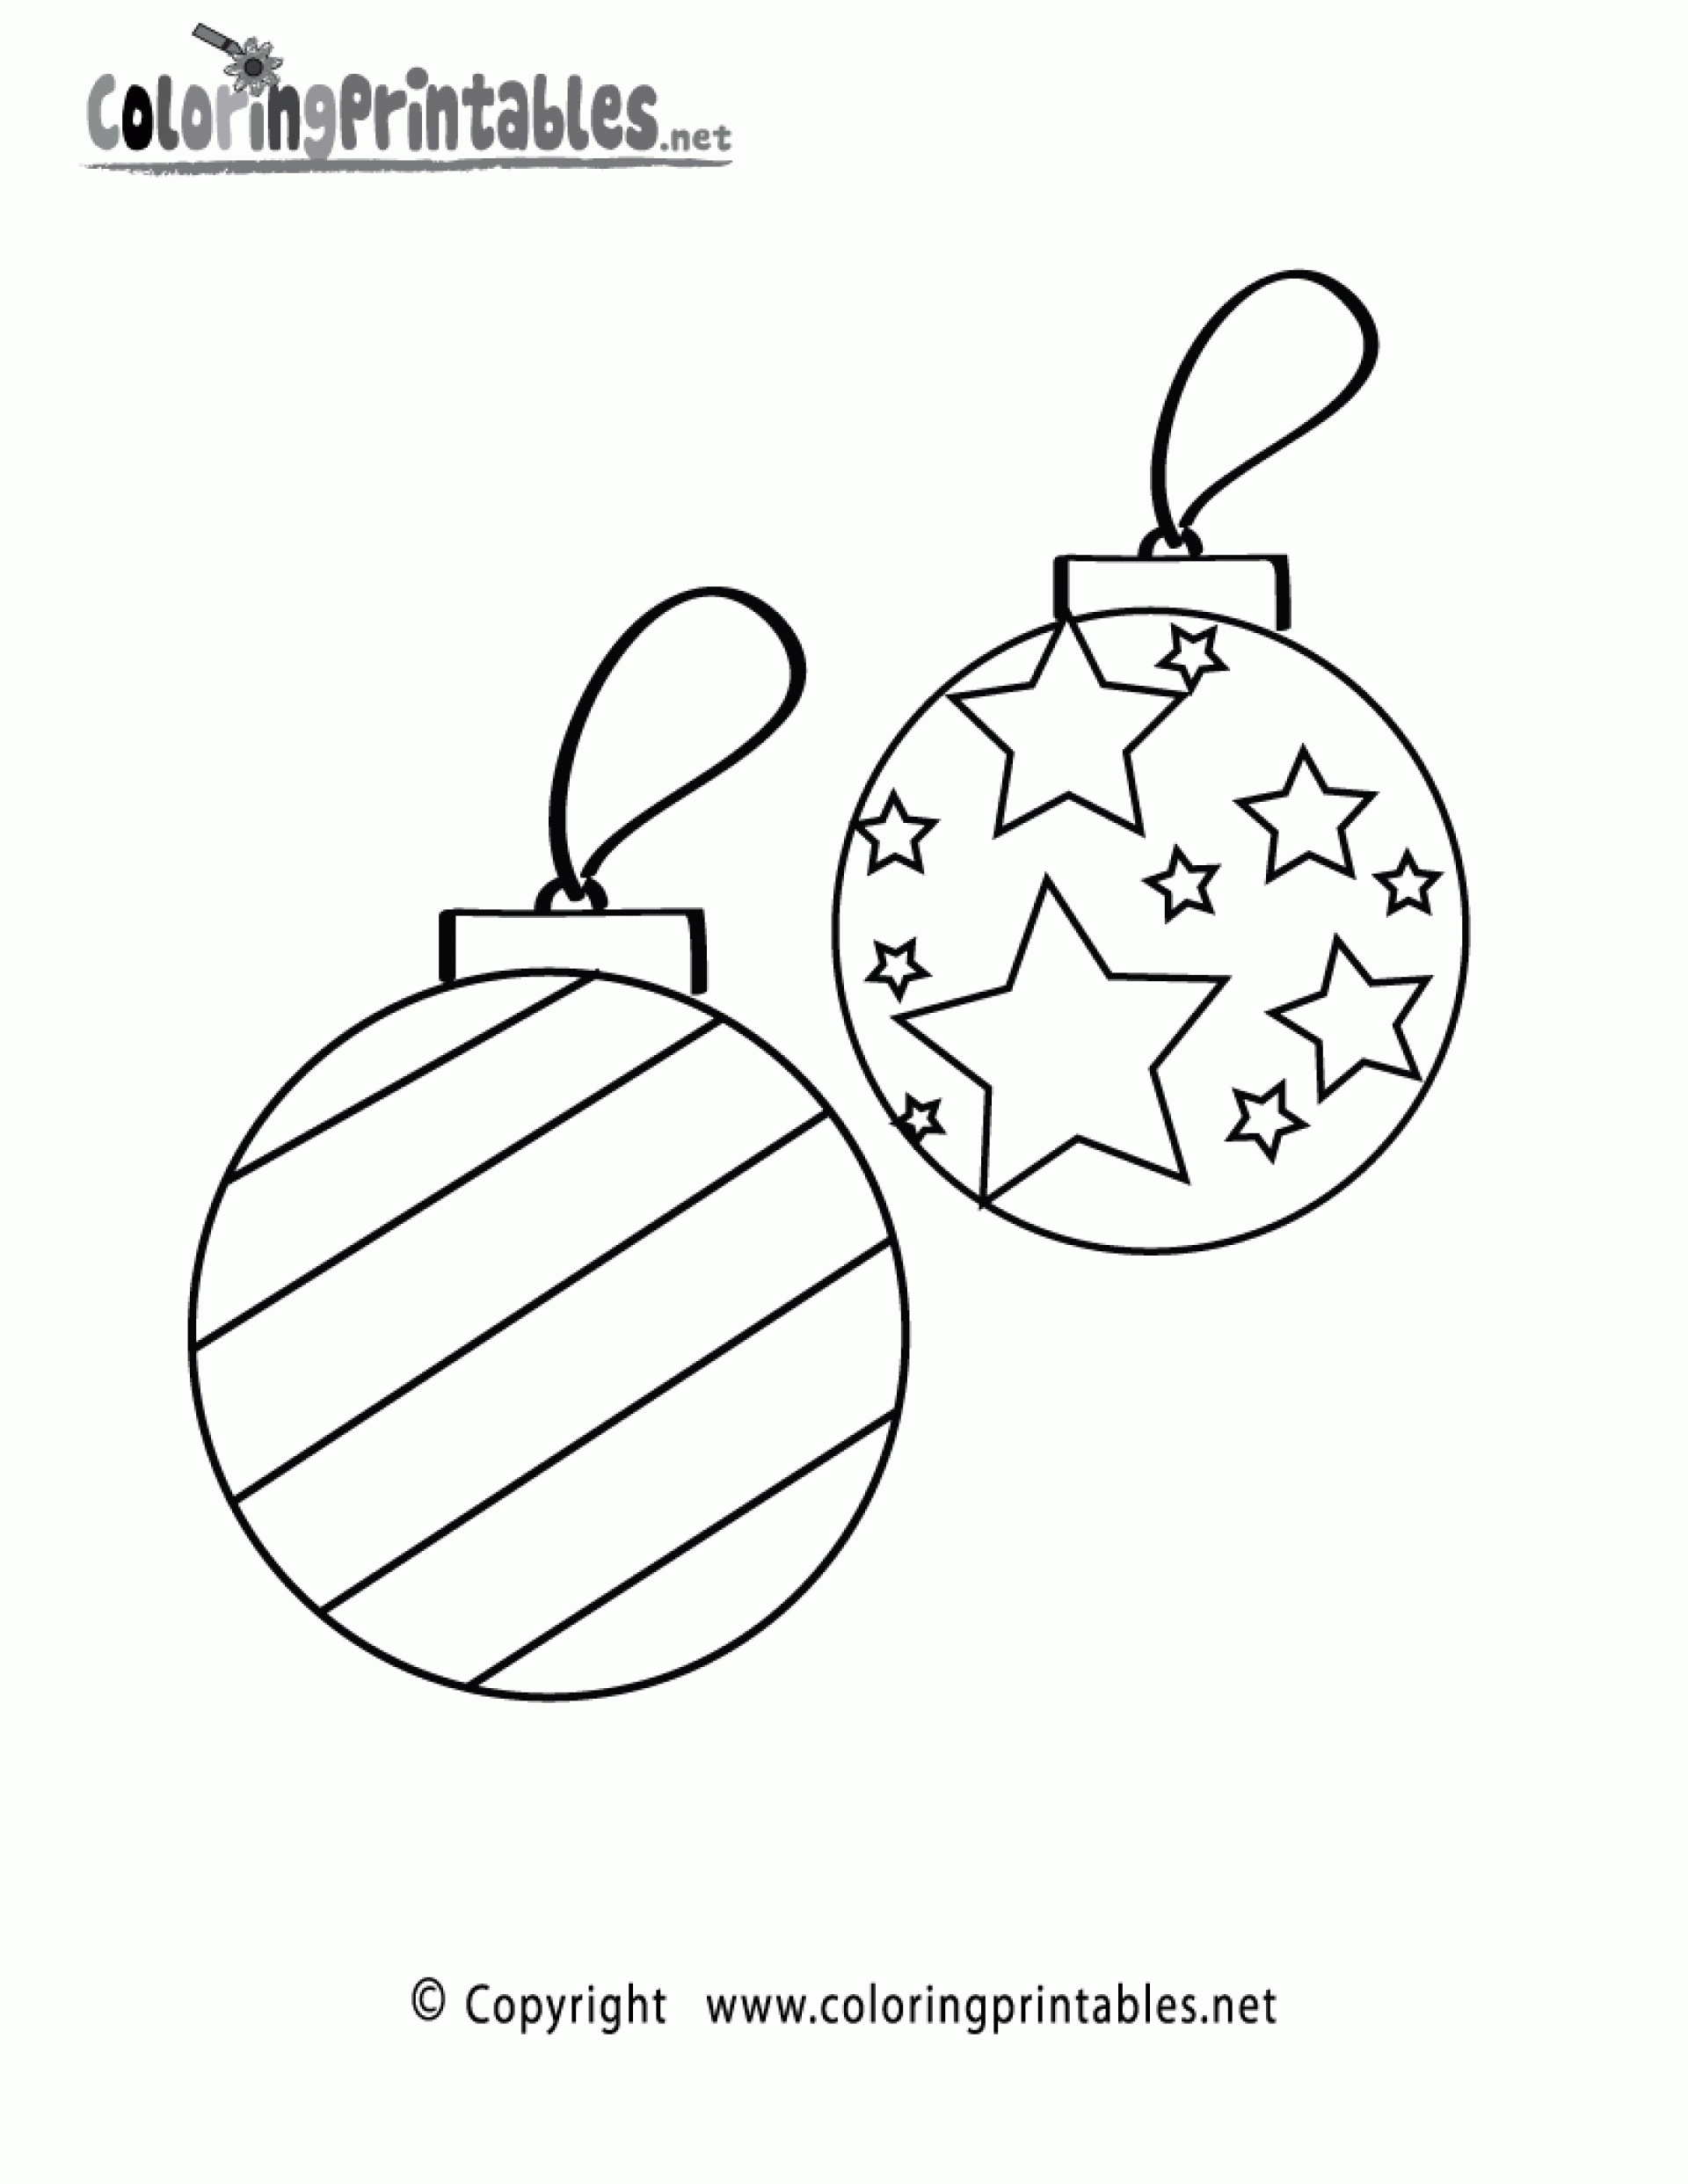 007 Template Ideas Printable Christmas Ornament Templates Coloring - Free Printable Christmas Ornament Patterns